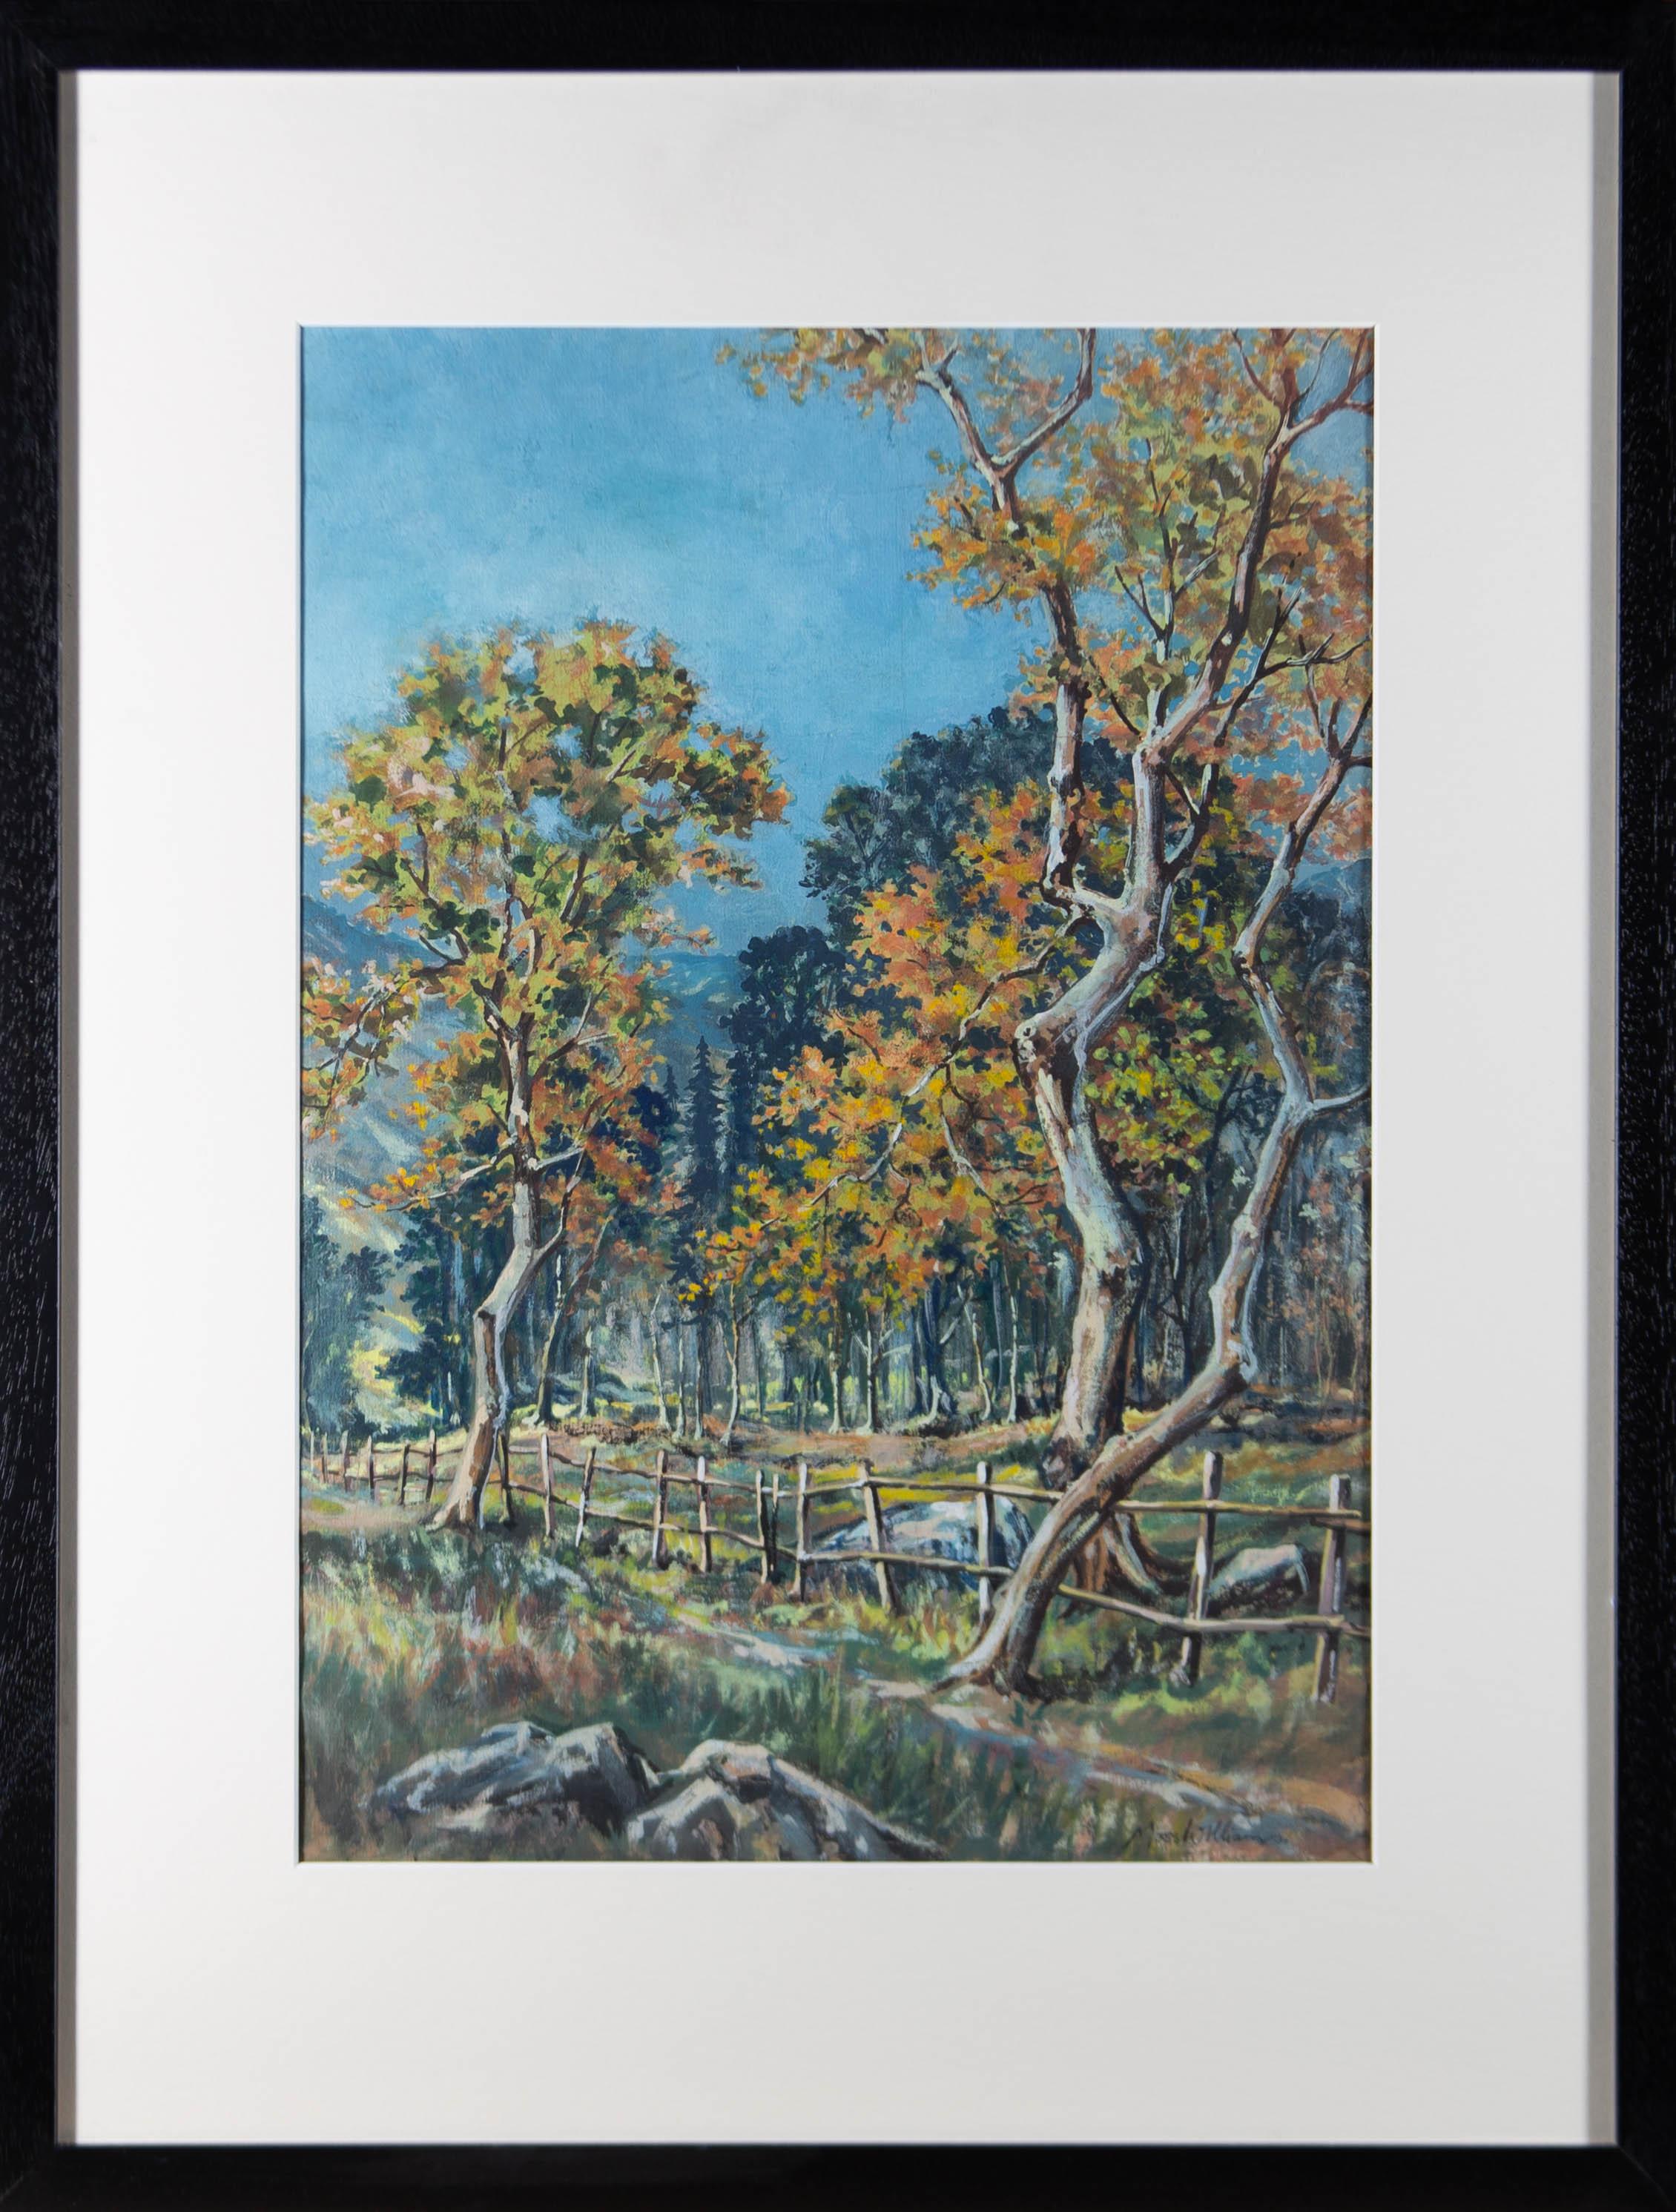 In this gouache study, Williams depicts a late summer woodland with a bright palette and compelling brush strokes. The artwork holds a calming, immersive ambiance, and is signed in the lower right. Well presented in a contemporary black frame with a